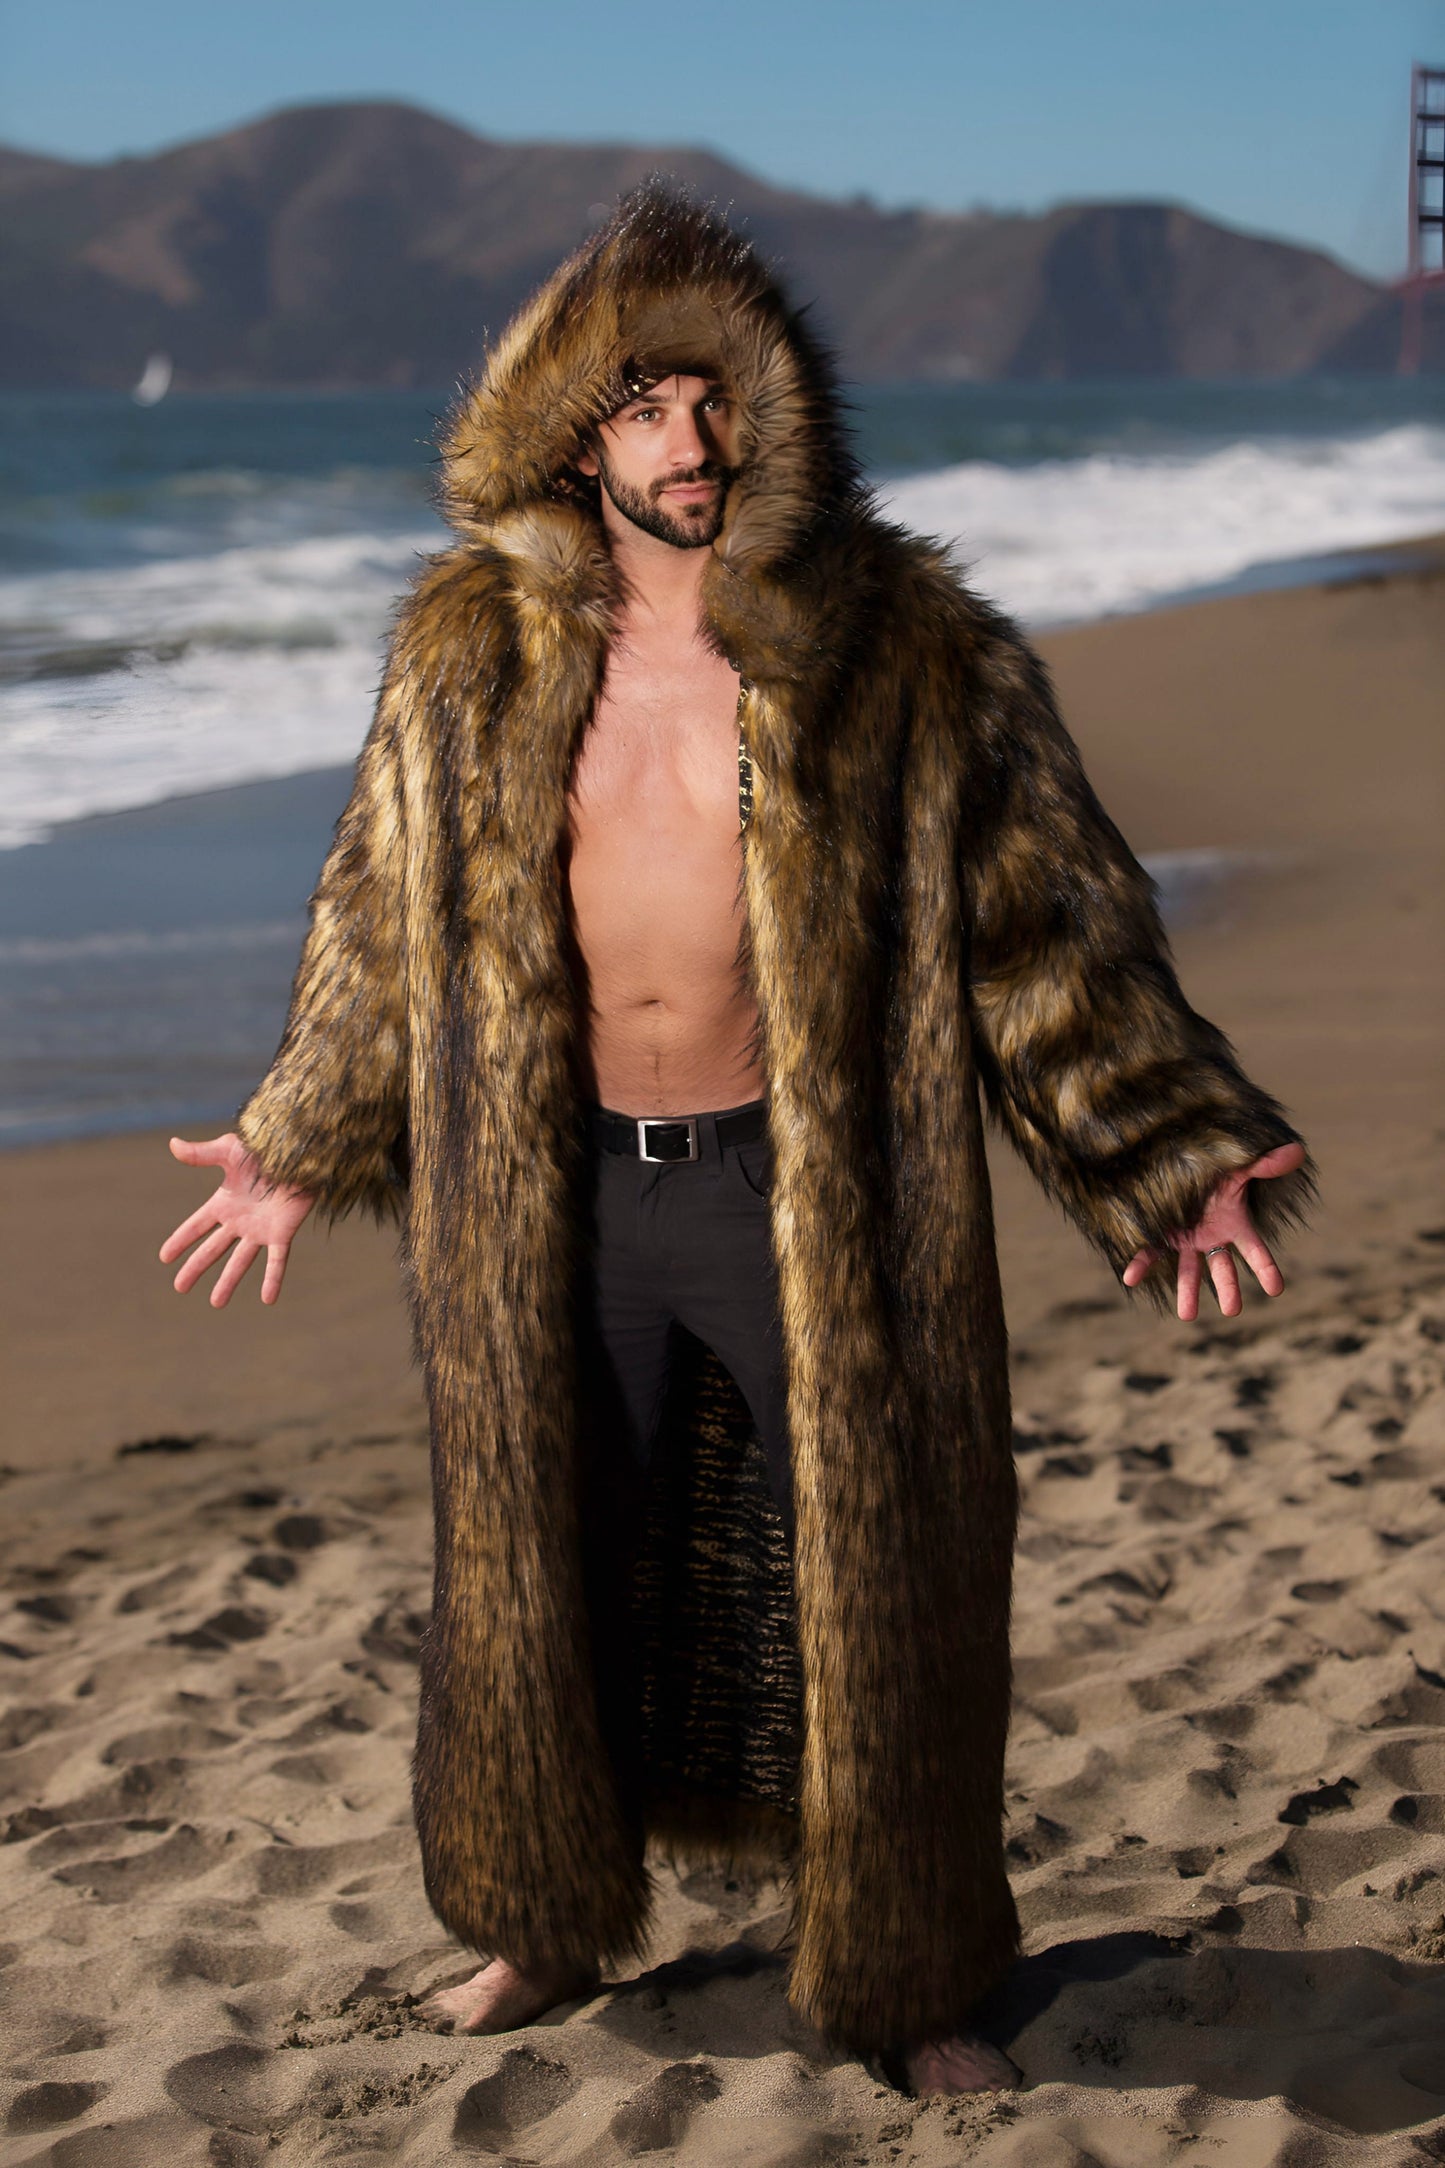 This versatile custom-made faux fur coat is perfect for festivals and Burning Man. Featuring practical zipped pockets, it effortlessly merges coziness with style. Embrace this garment to radiate a commanding aura reminiscent of a majestic bear.